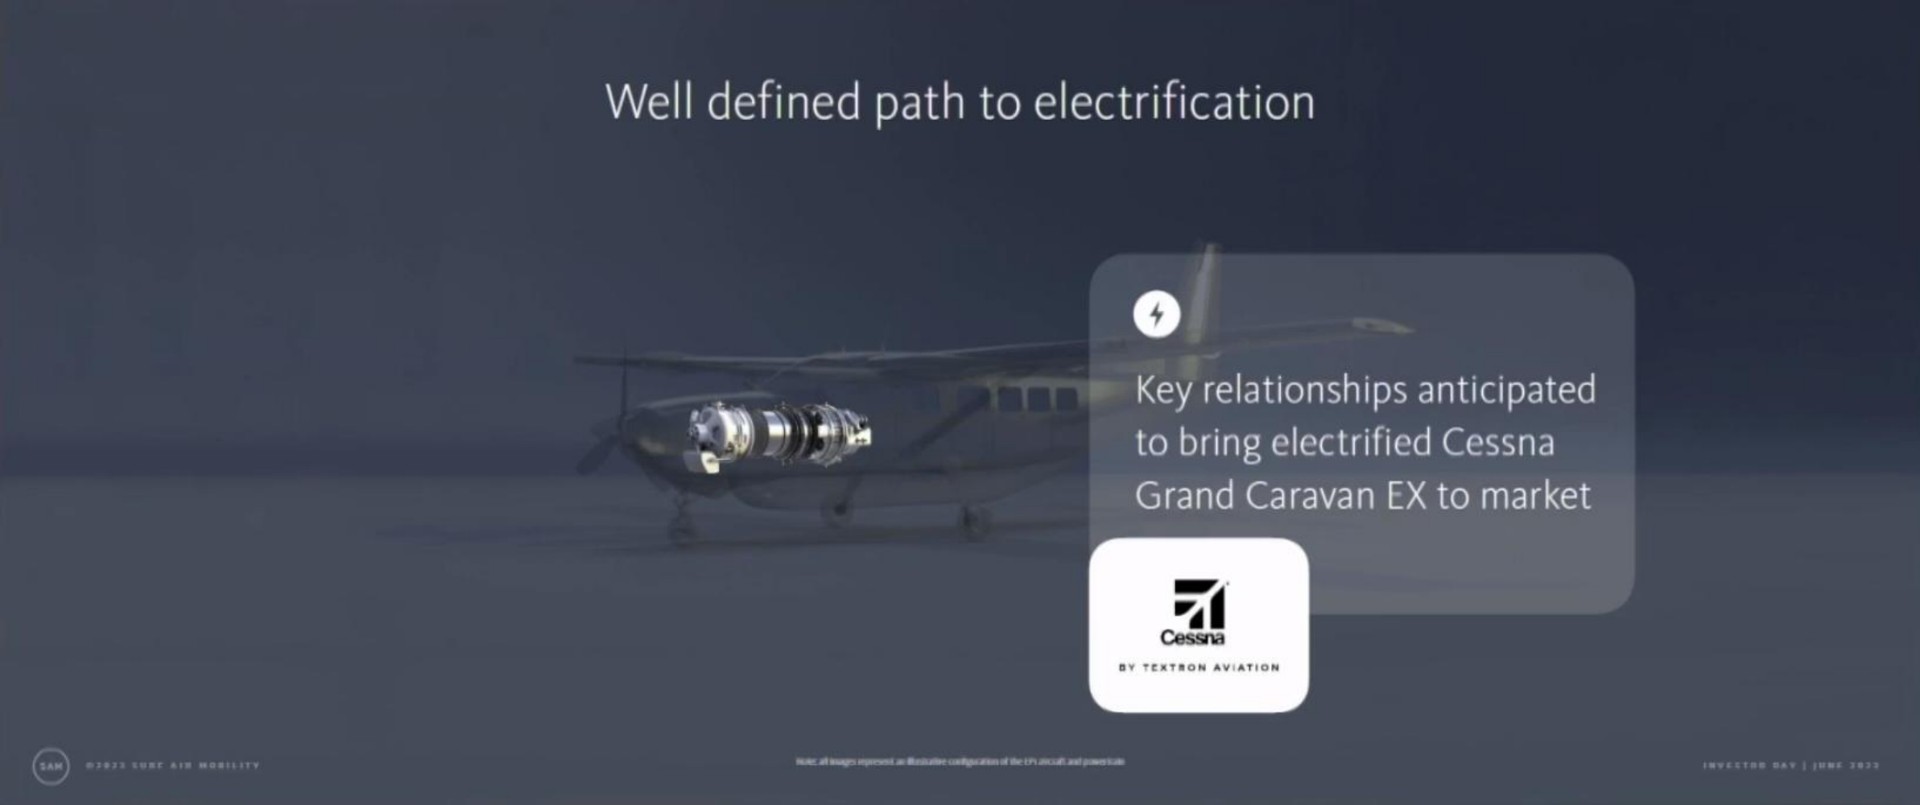 well defined path to electrification pend an key relationships anticipated to bring electrified grand caravan to market | Surf Air